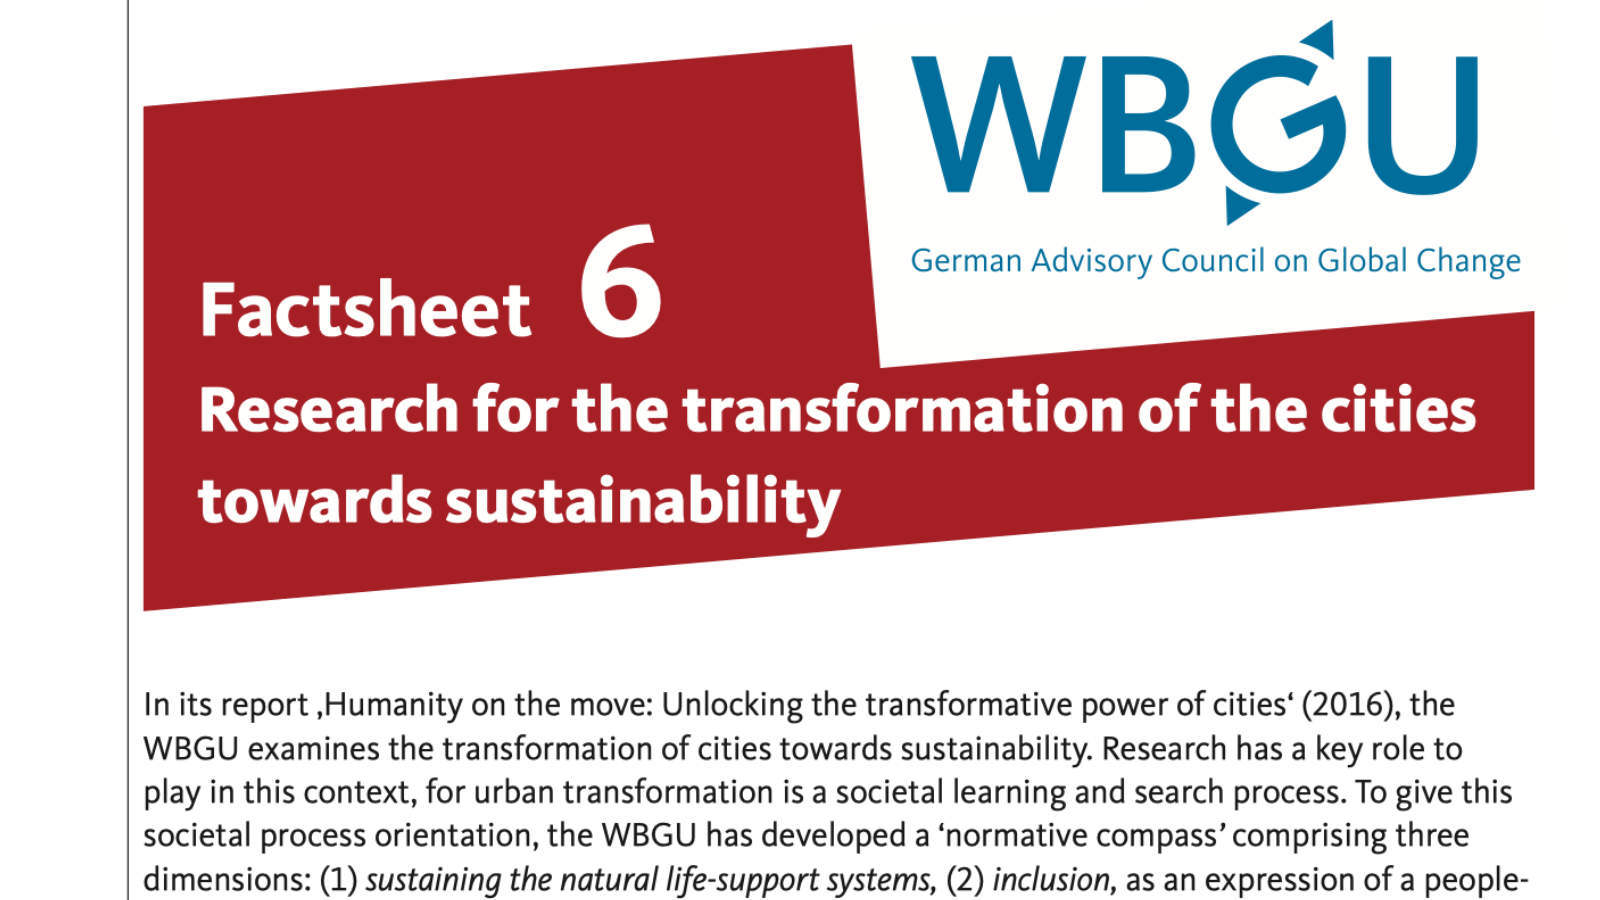 Factsheet: Research for the transformation of the cities towards sustainability